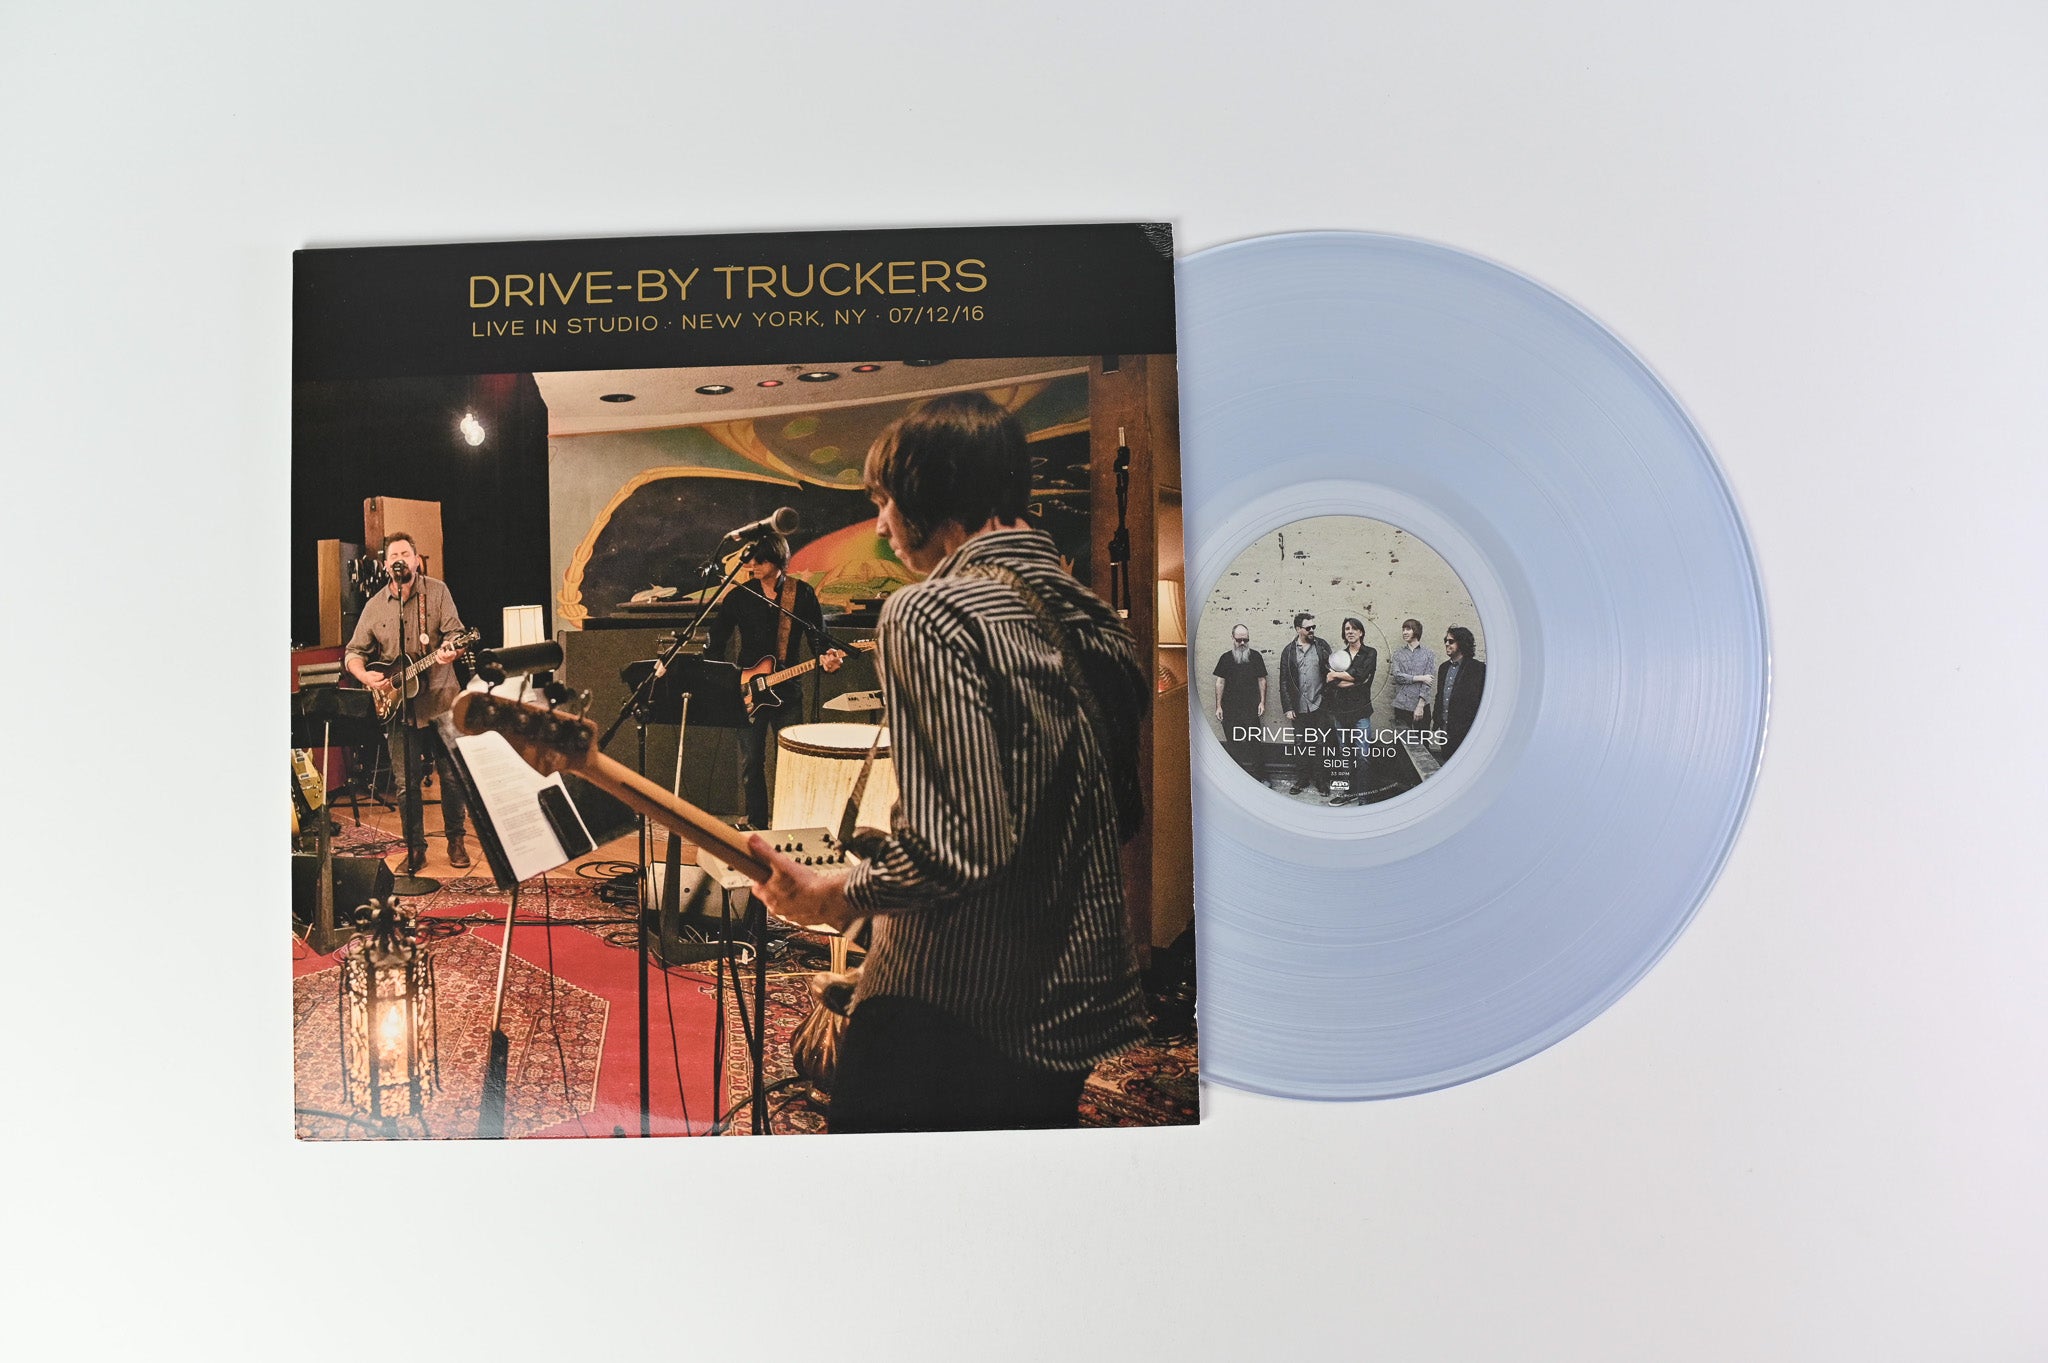 Drive-By Truckers - Live In Studio · New York, NY · 07/12/16 on ATO Ltd RSD Clear Vinyl